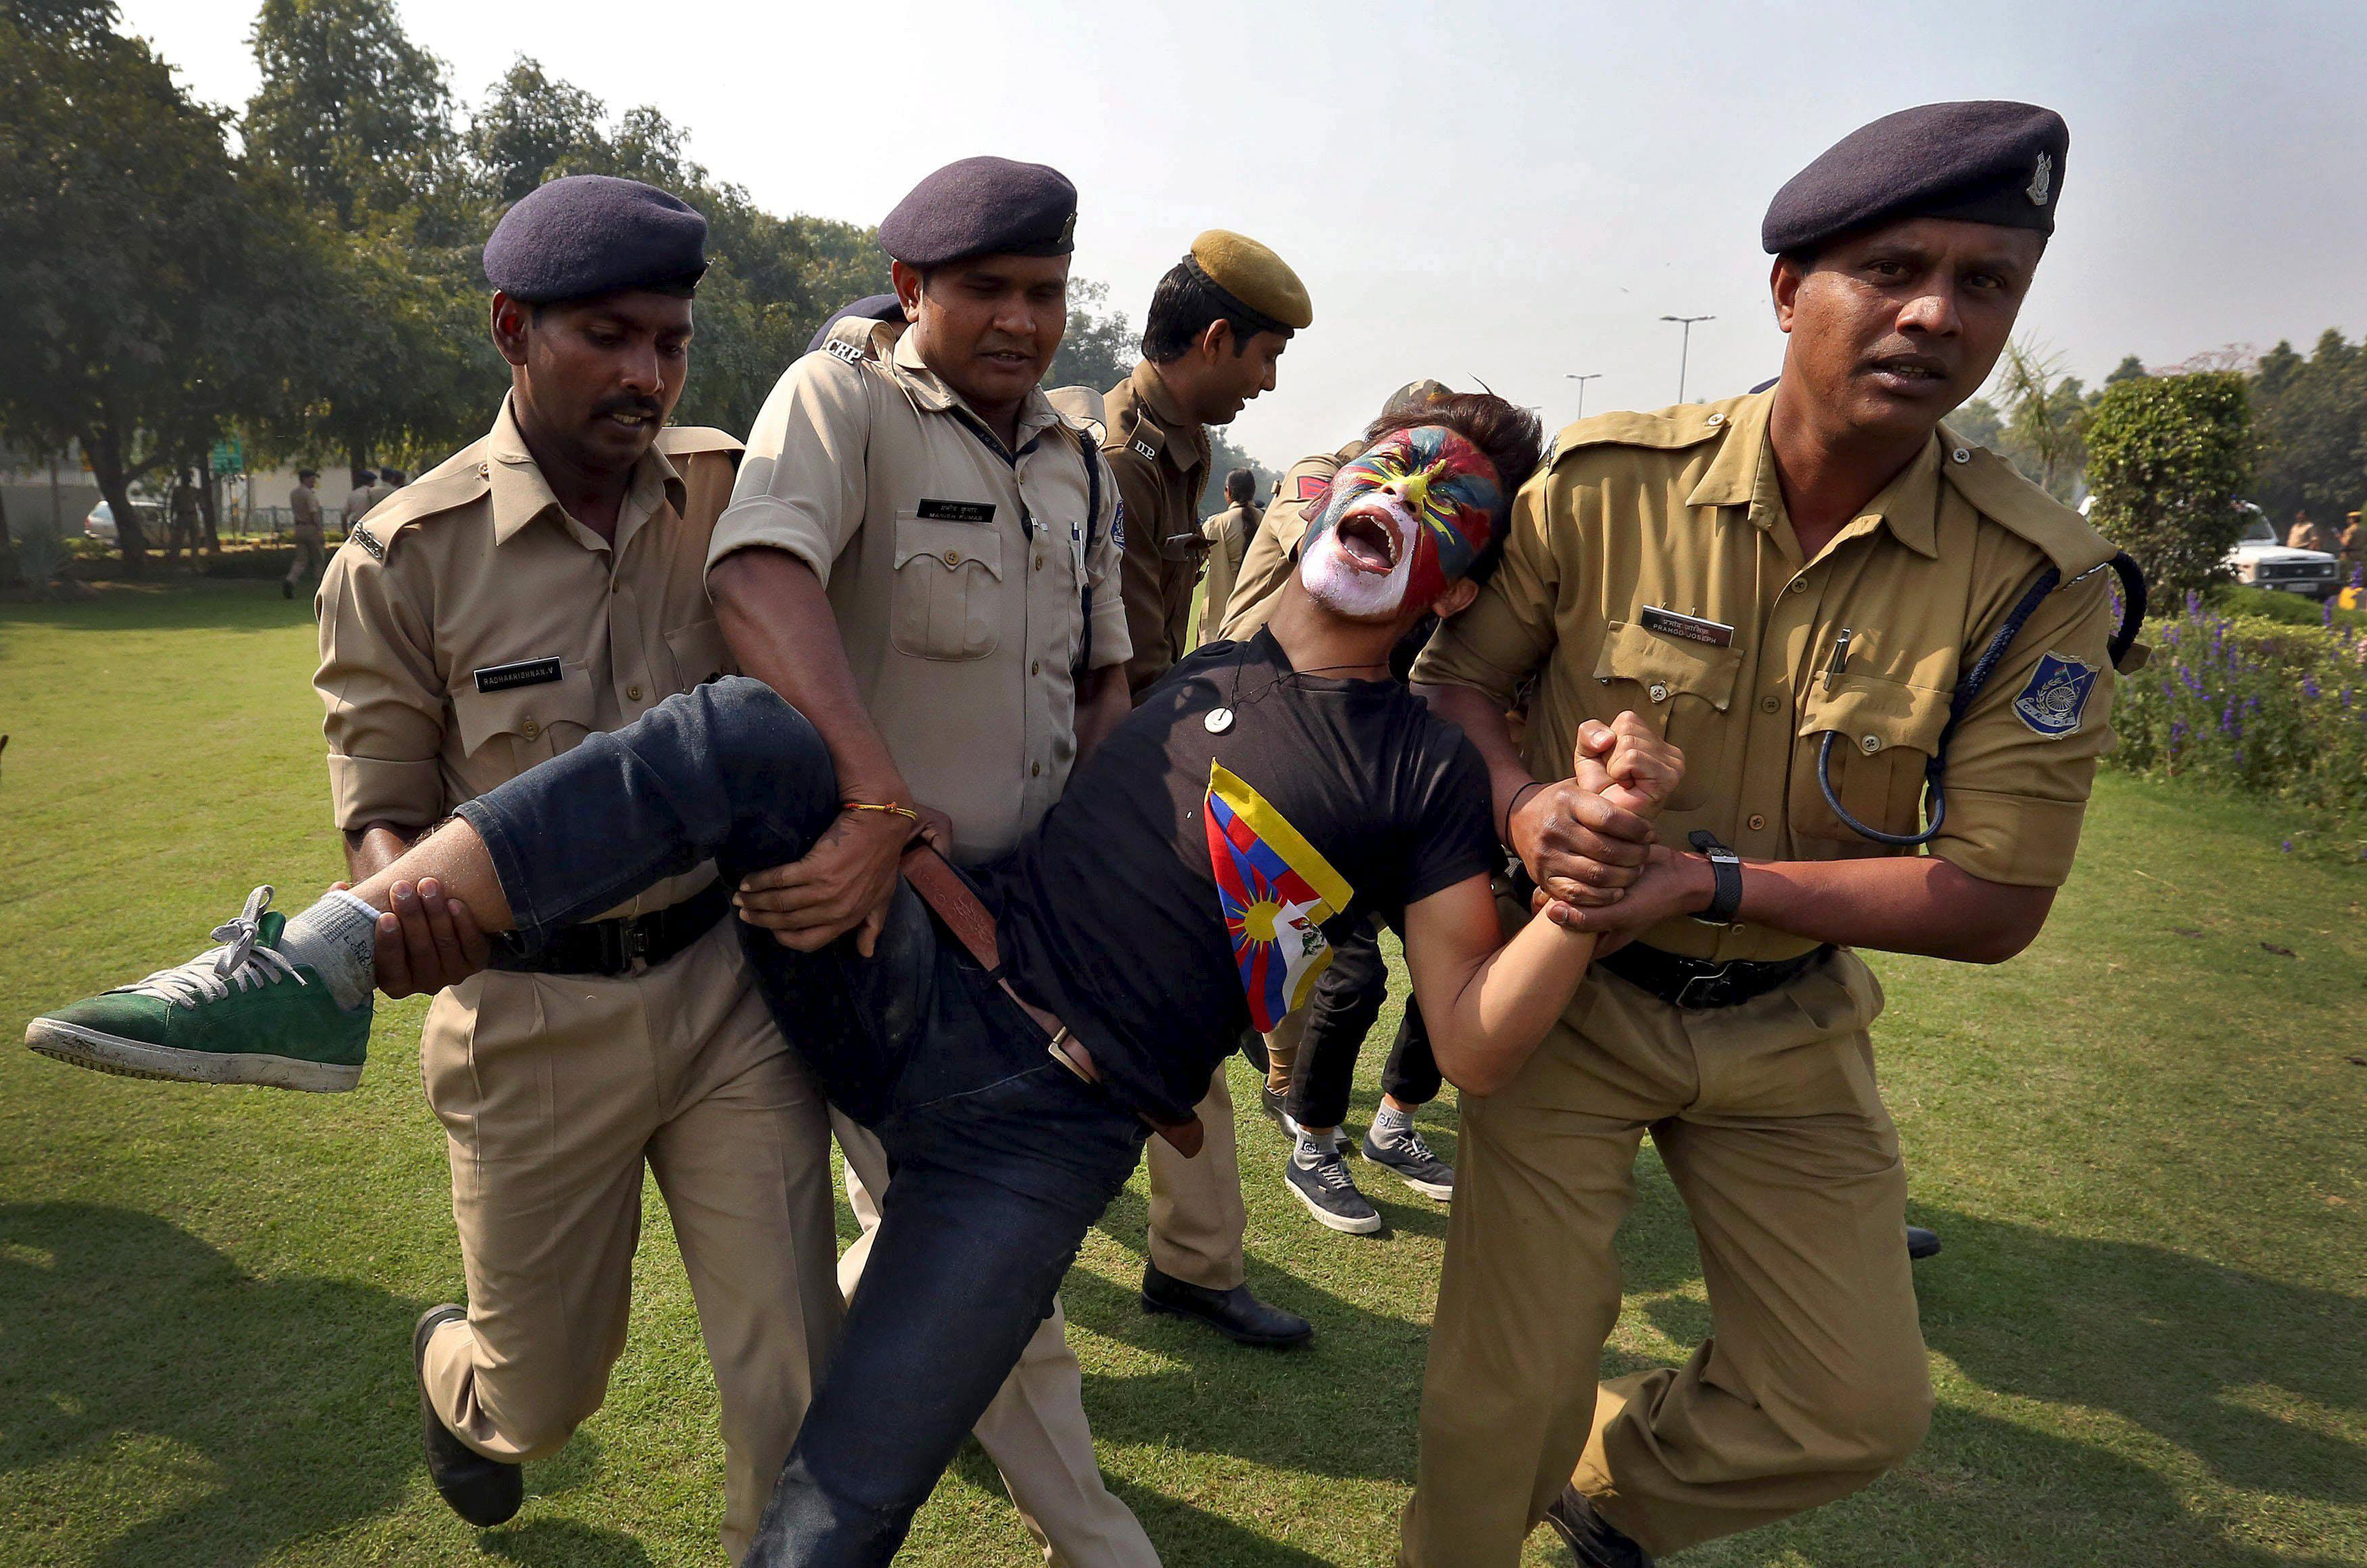 Indian police detain a Tibetan activist during a protest held to mark the 57th anniversary of the Ti